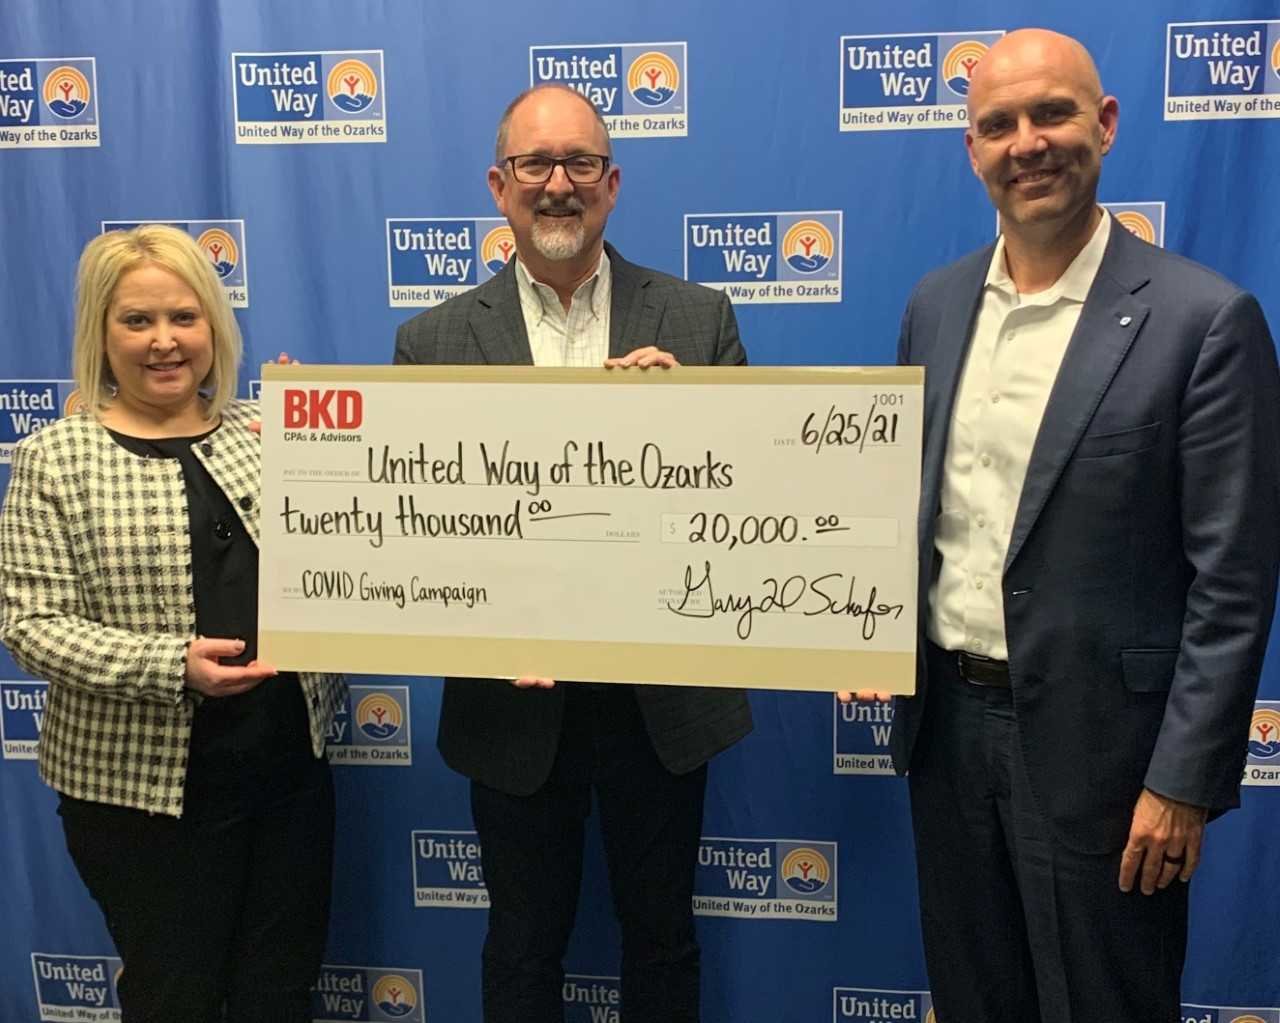 BKD officials present a $20,000 donation to United Way of the Ozarks as part of the Springfield-based public accounting firm's giving campaign.